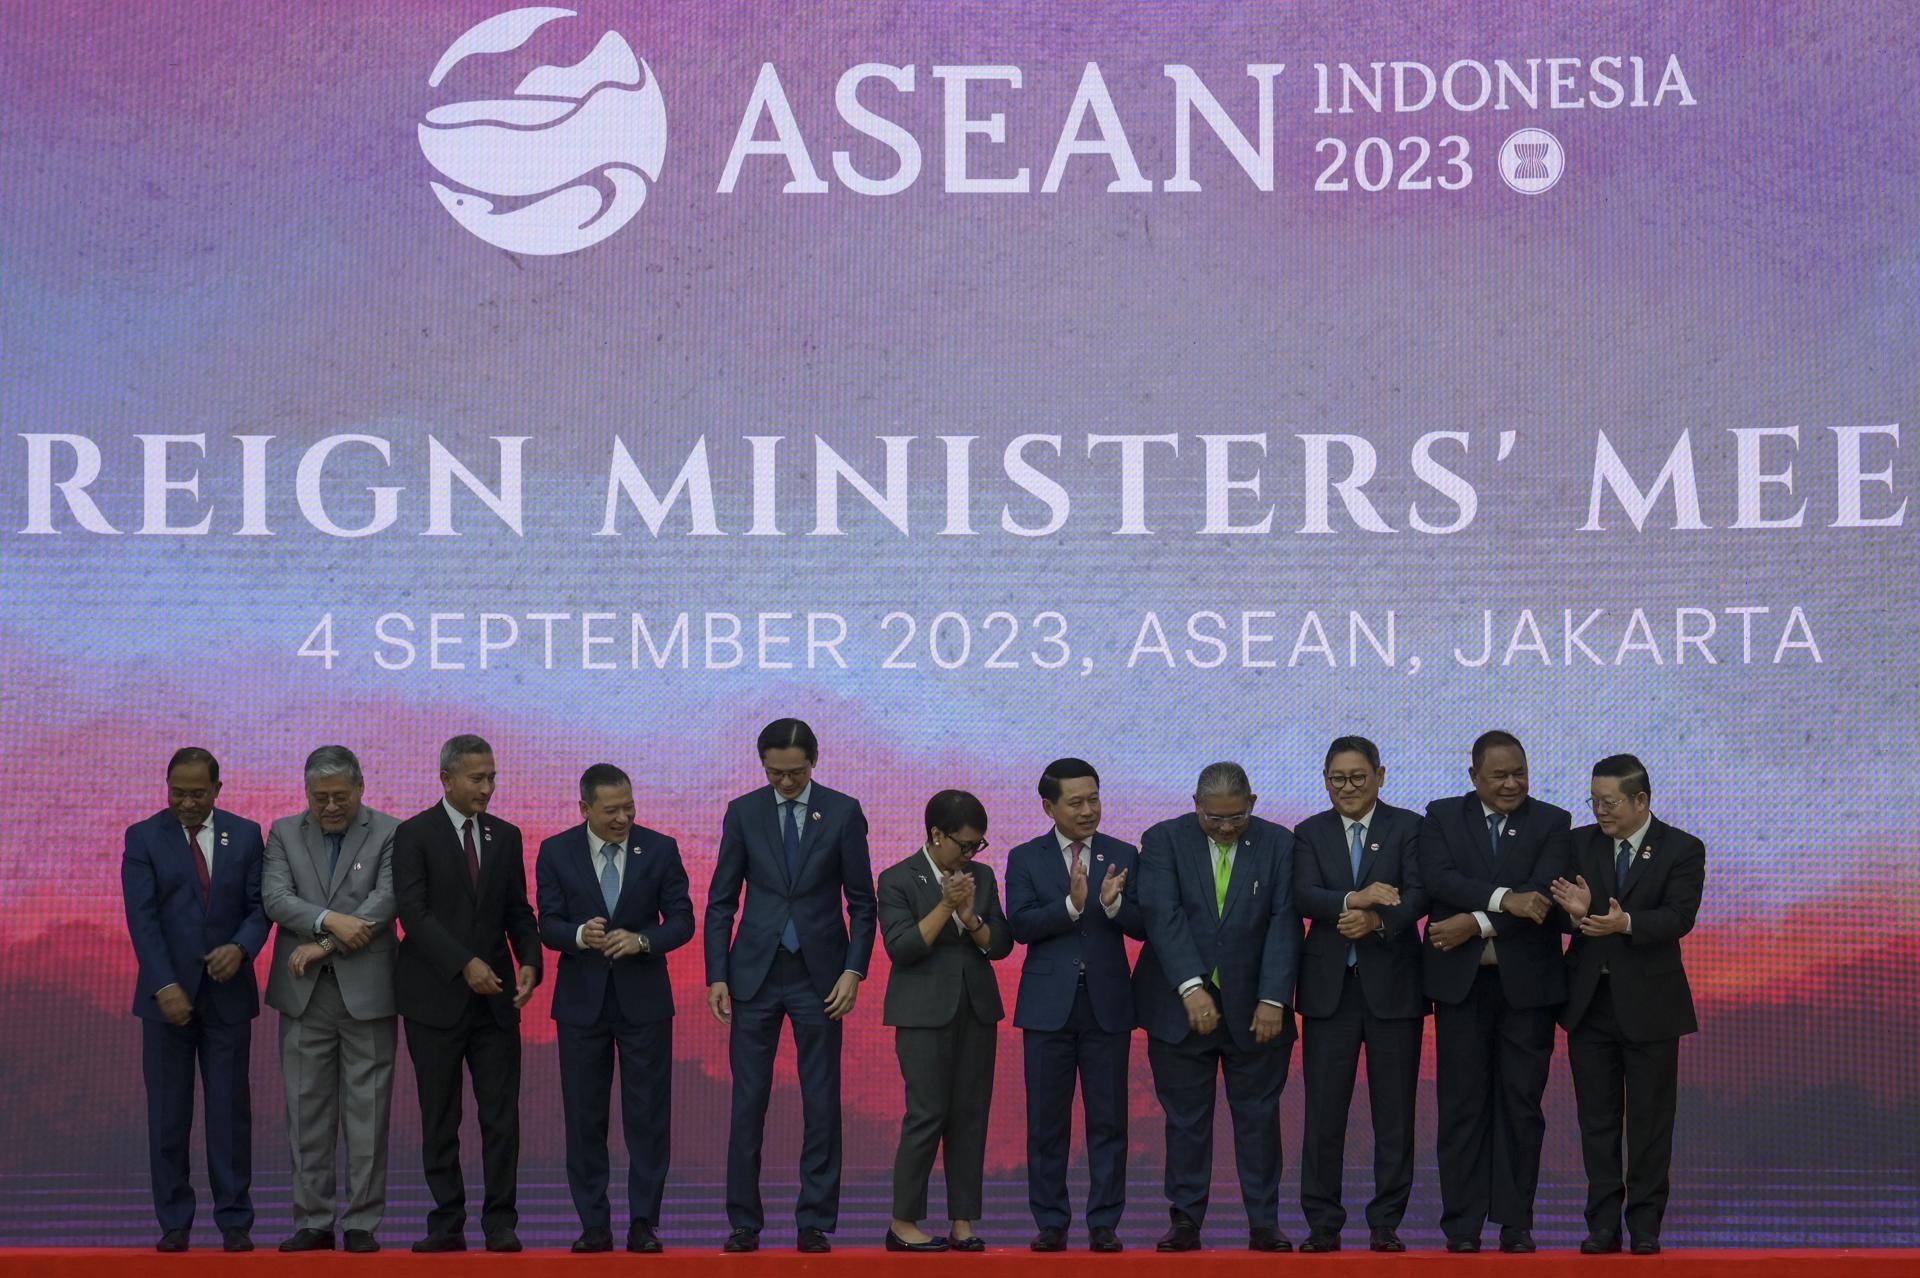 (L-R) Malaysia's Foreign Minister Zambry Abd Kadir, Philippines' Foreign Minister Enrique A Manalo, Singapore's Foreign Minister Vivian Balakrishnan, Thailand's Permanen Secretary of the ministry of foreign affairs Sarun Charoensuwan, Vietnam's Deputy Foreign Minister Do Hung Viet, Indonesia's Foreign Minister Retno Marsudi, Laos' Foreign Minister Saleumxay Kommasith, Brunei's Foreign Minister Erywan Pehin Yusof, Cambodia's Foreign Minister Sok Chenda Sophea, East Timor's Foreign Minister Bendito dos Santos Freitas, and ASEAN Secretary General Kao Kim Hourn, pose during the family photo session of the Association of Southeast Asian Nations (ASEAN) Foreign Ministers'Äô Meeting ahead of the ASEAN Summit, at the ASEAN Secretariat in Jakarta, Indonesia, 04 September 2023. EFE/EPA/BAY ISMOYO / POOL
